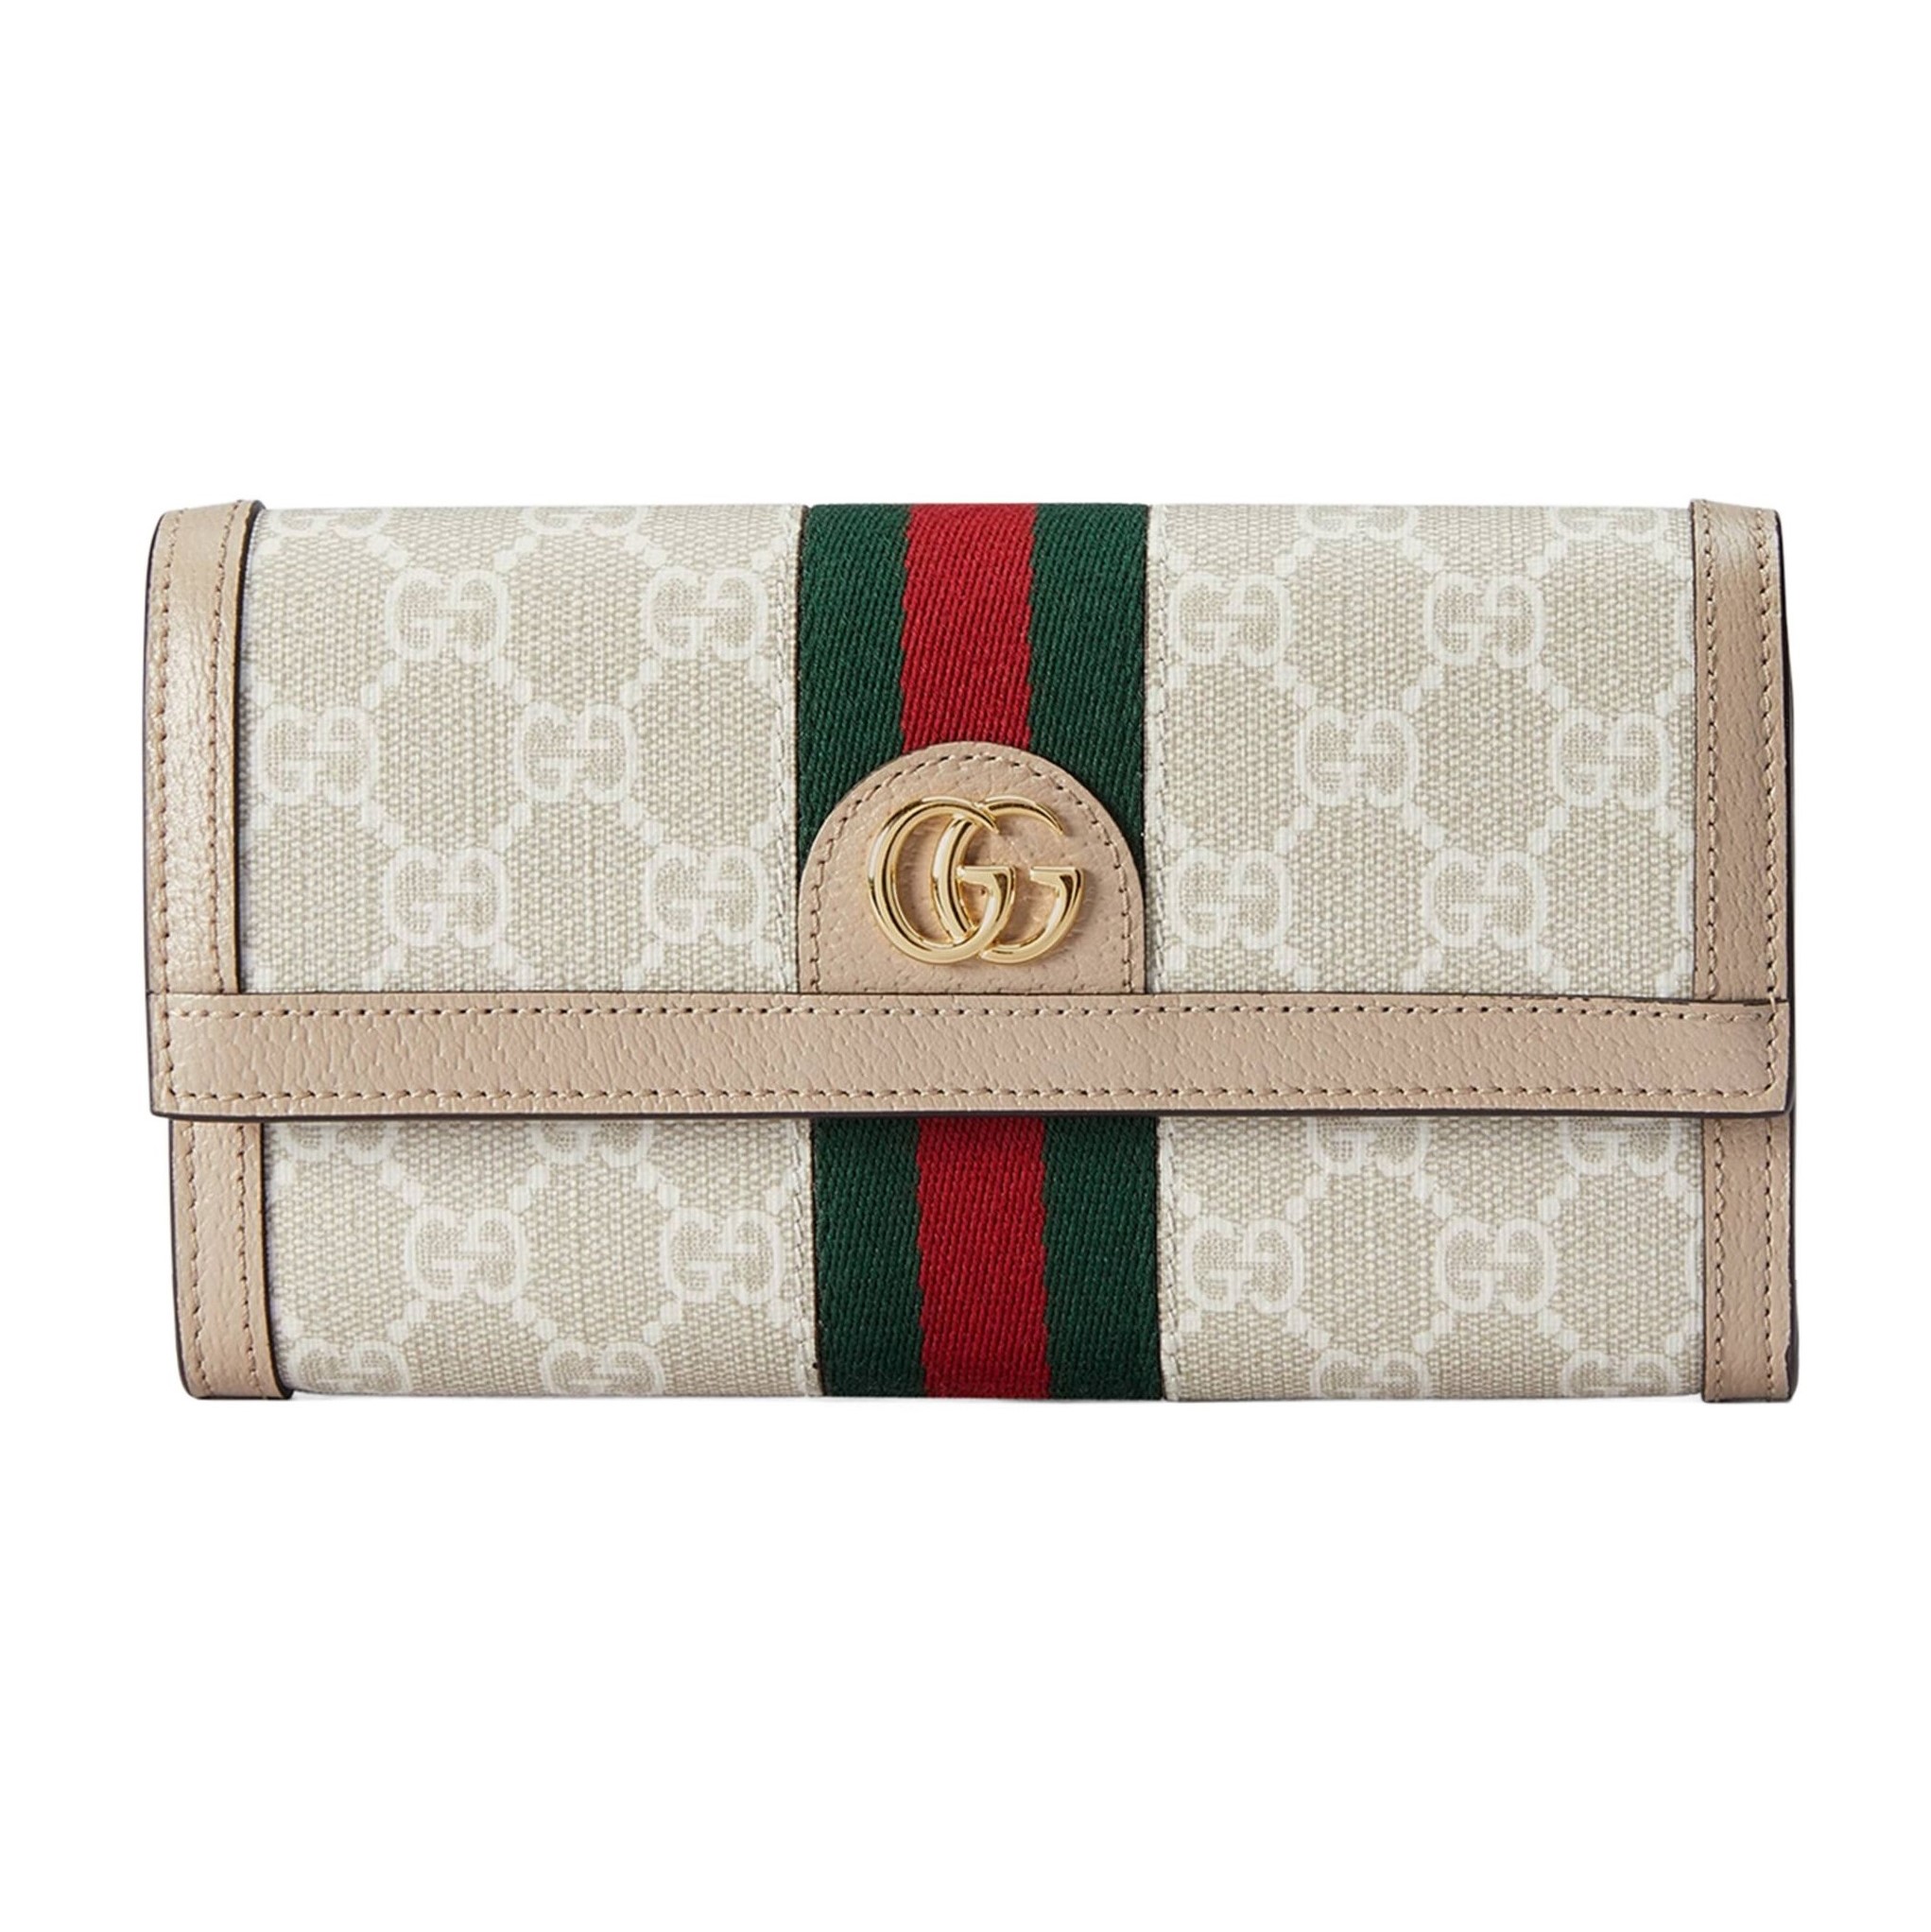 VÍ NỮ DÀI GUCCI OPHIDIA GG CONTINENTAL WALLET WITH BEIGE AND WHITE GG SUPREME CANVAS 3